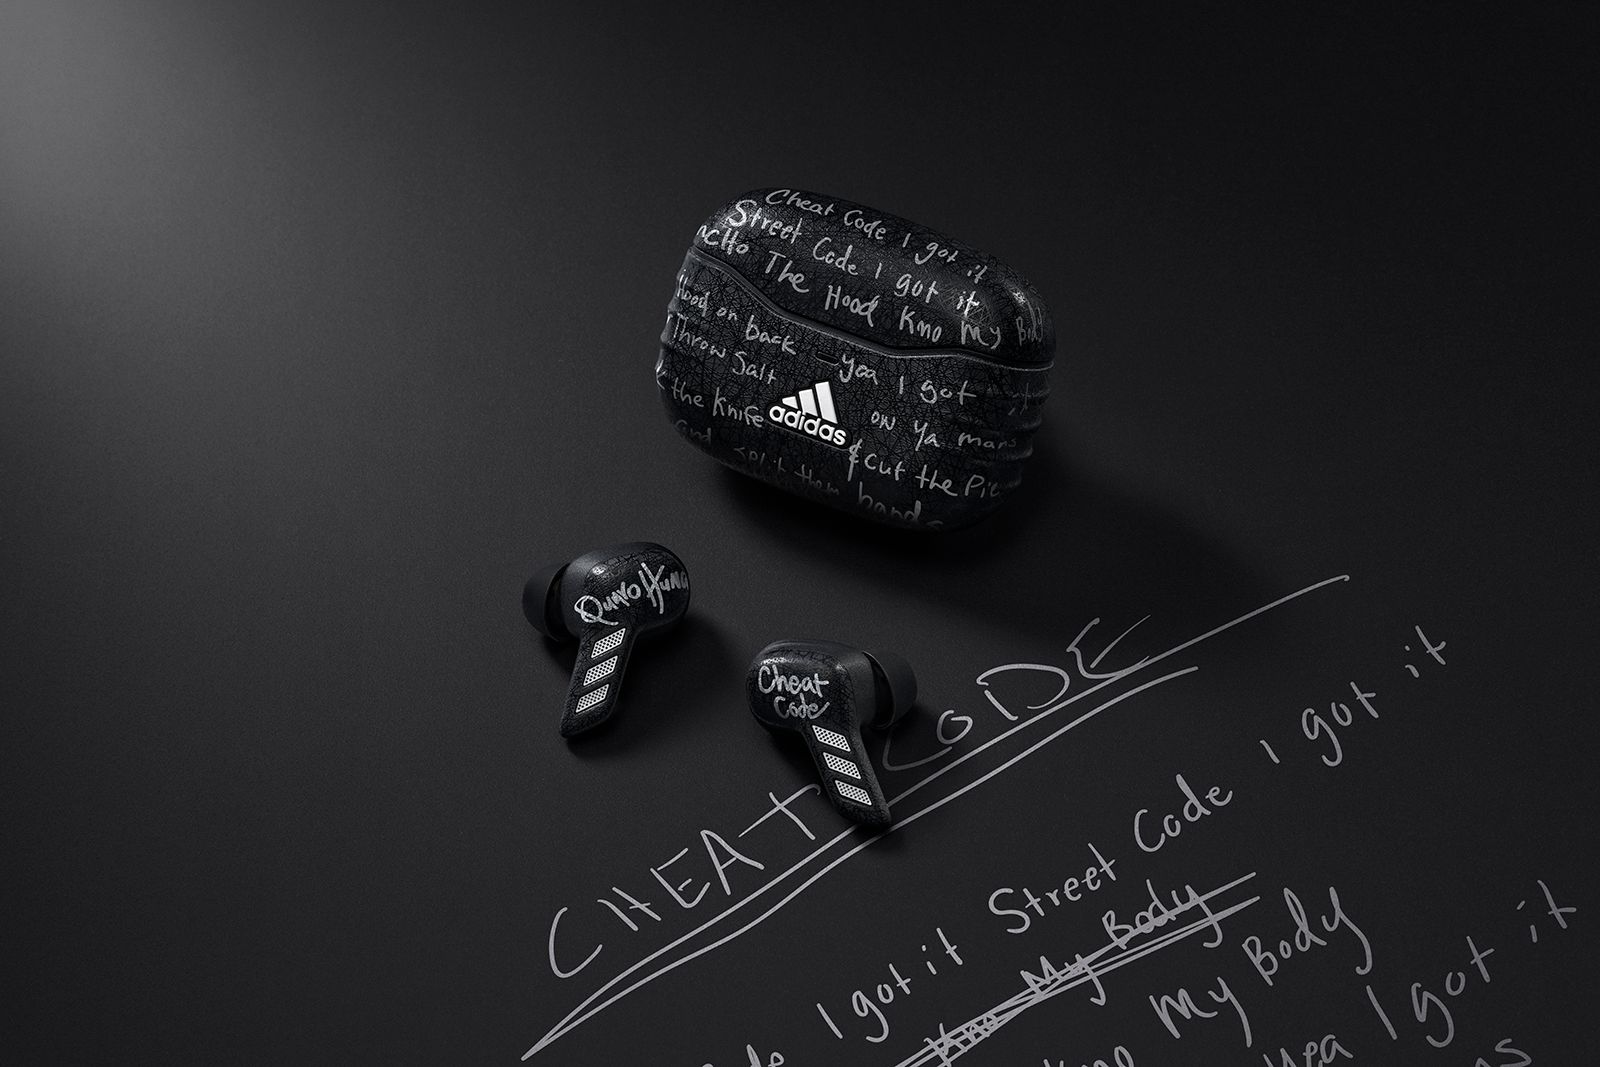 Adidas teams with Quavo for limited edition Z.N.E. 01 ANC buds photo 2